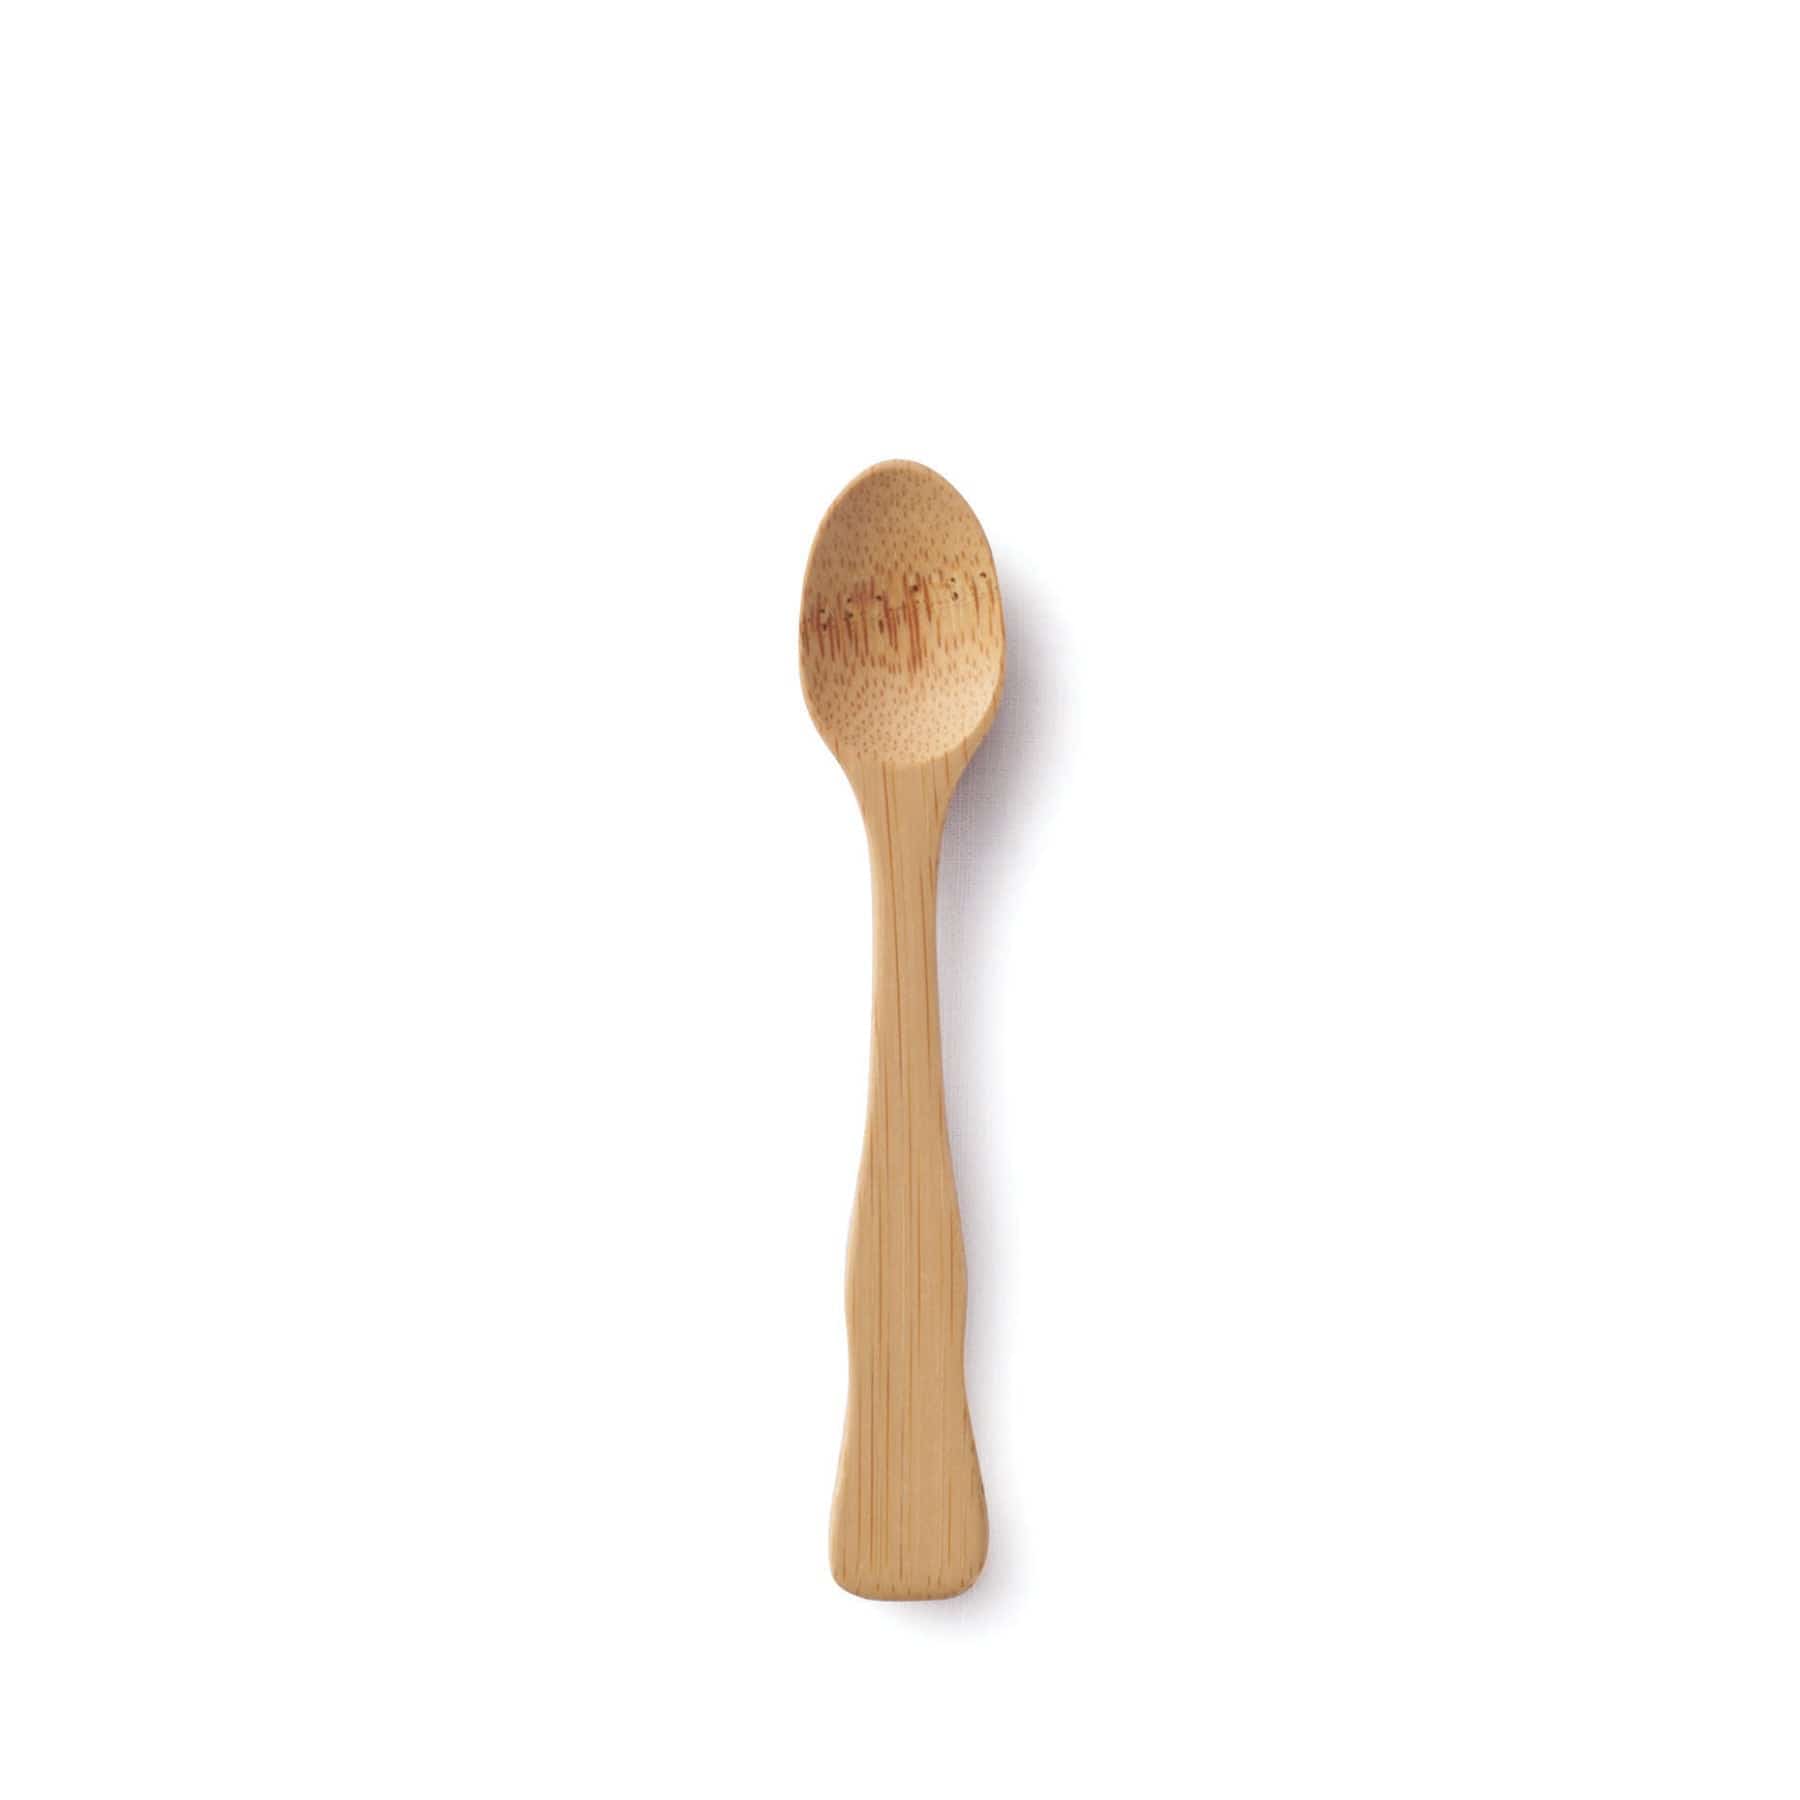 Wooden spoon on white background, top view, kitchen utensil, cooking tool, minimalist food preparation concept